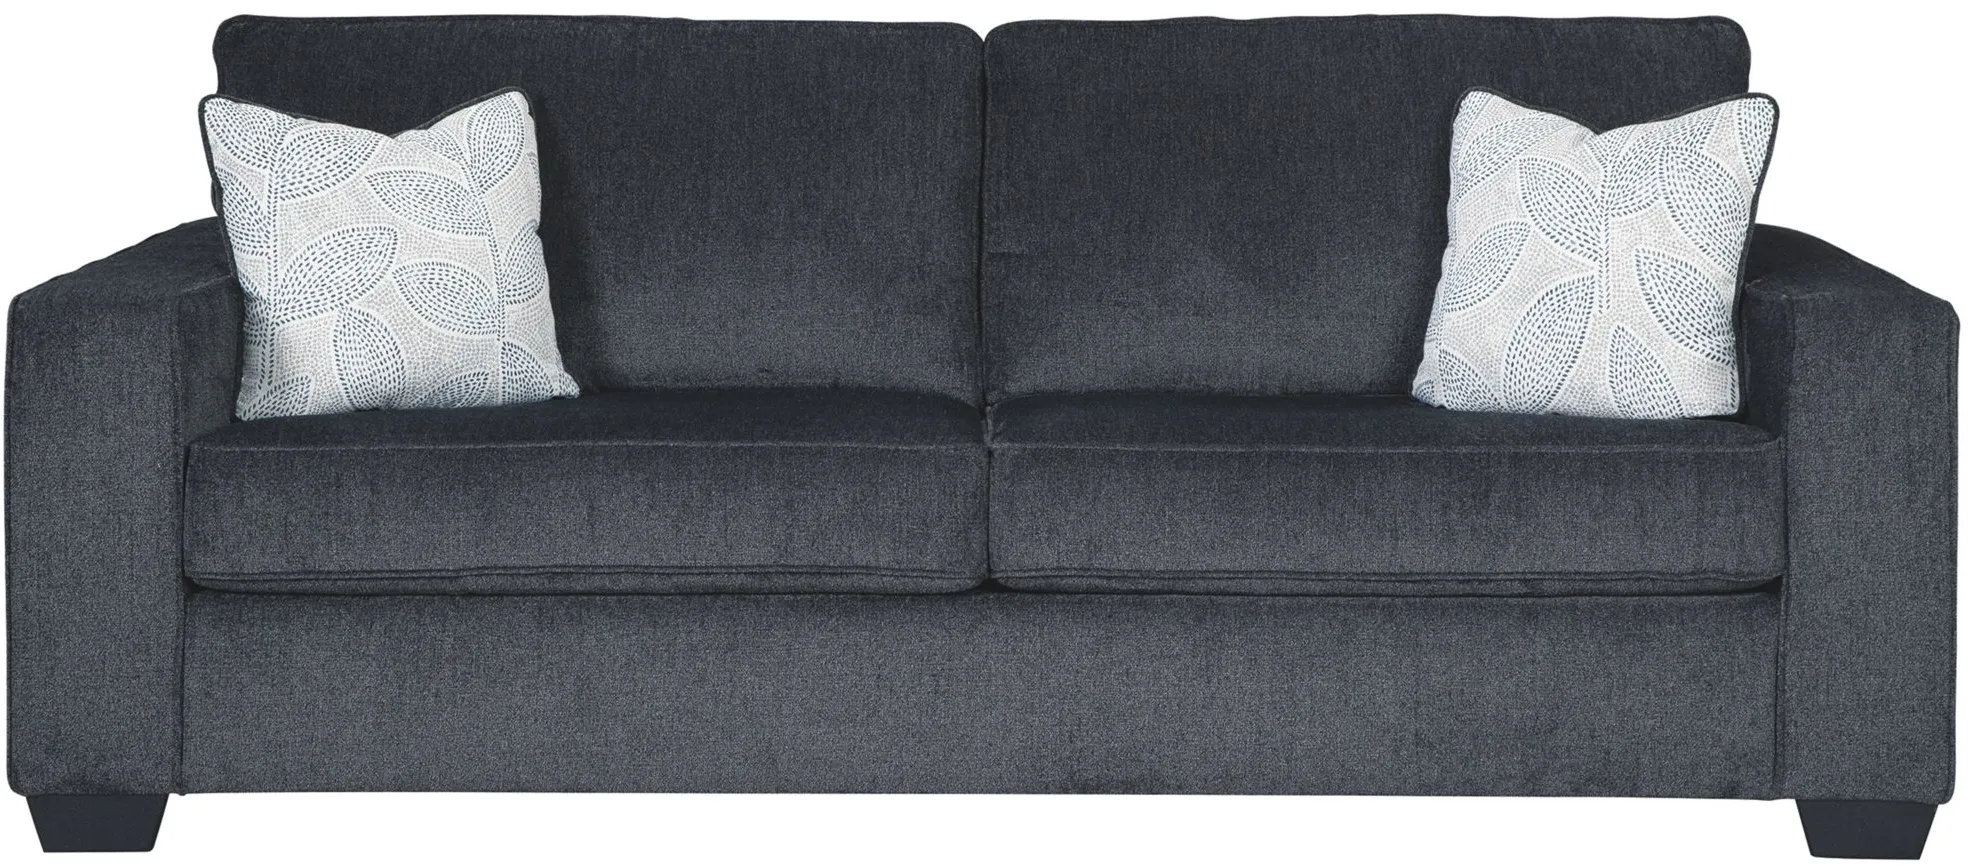 Adelson Chenille Queen Sleeper Sofa in Slate Gray by Ashley Furniture